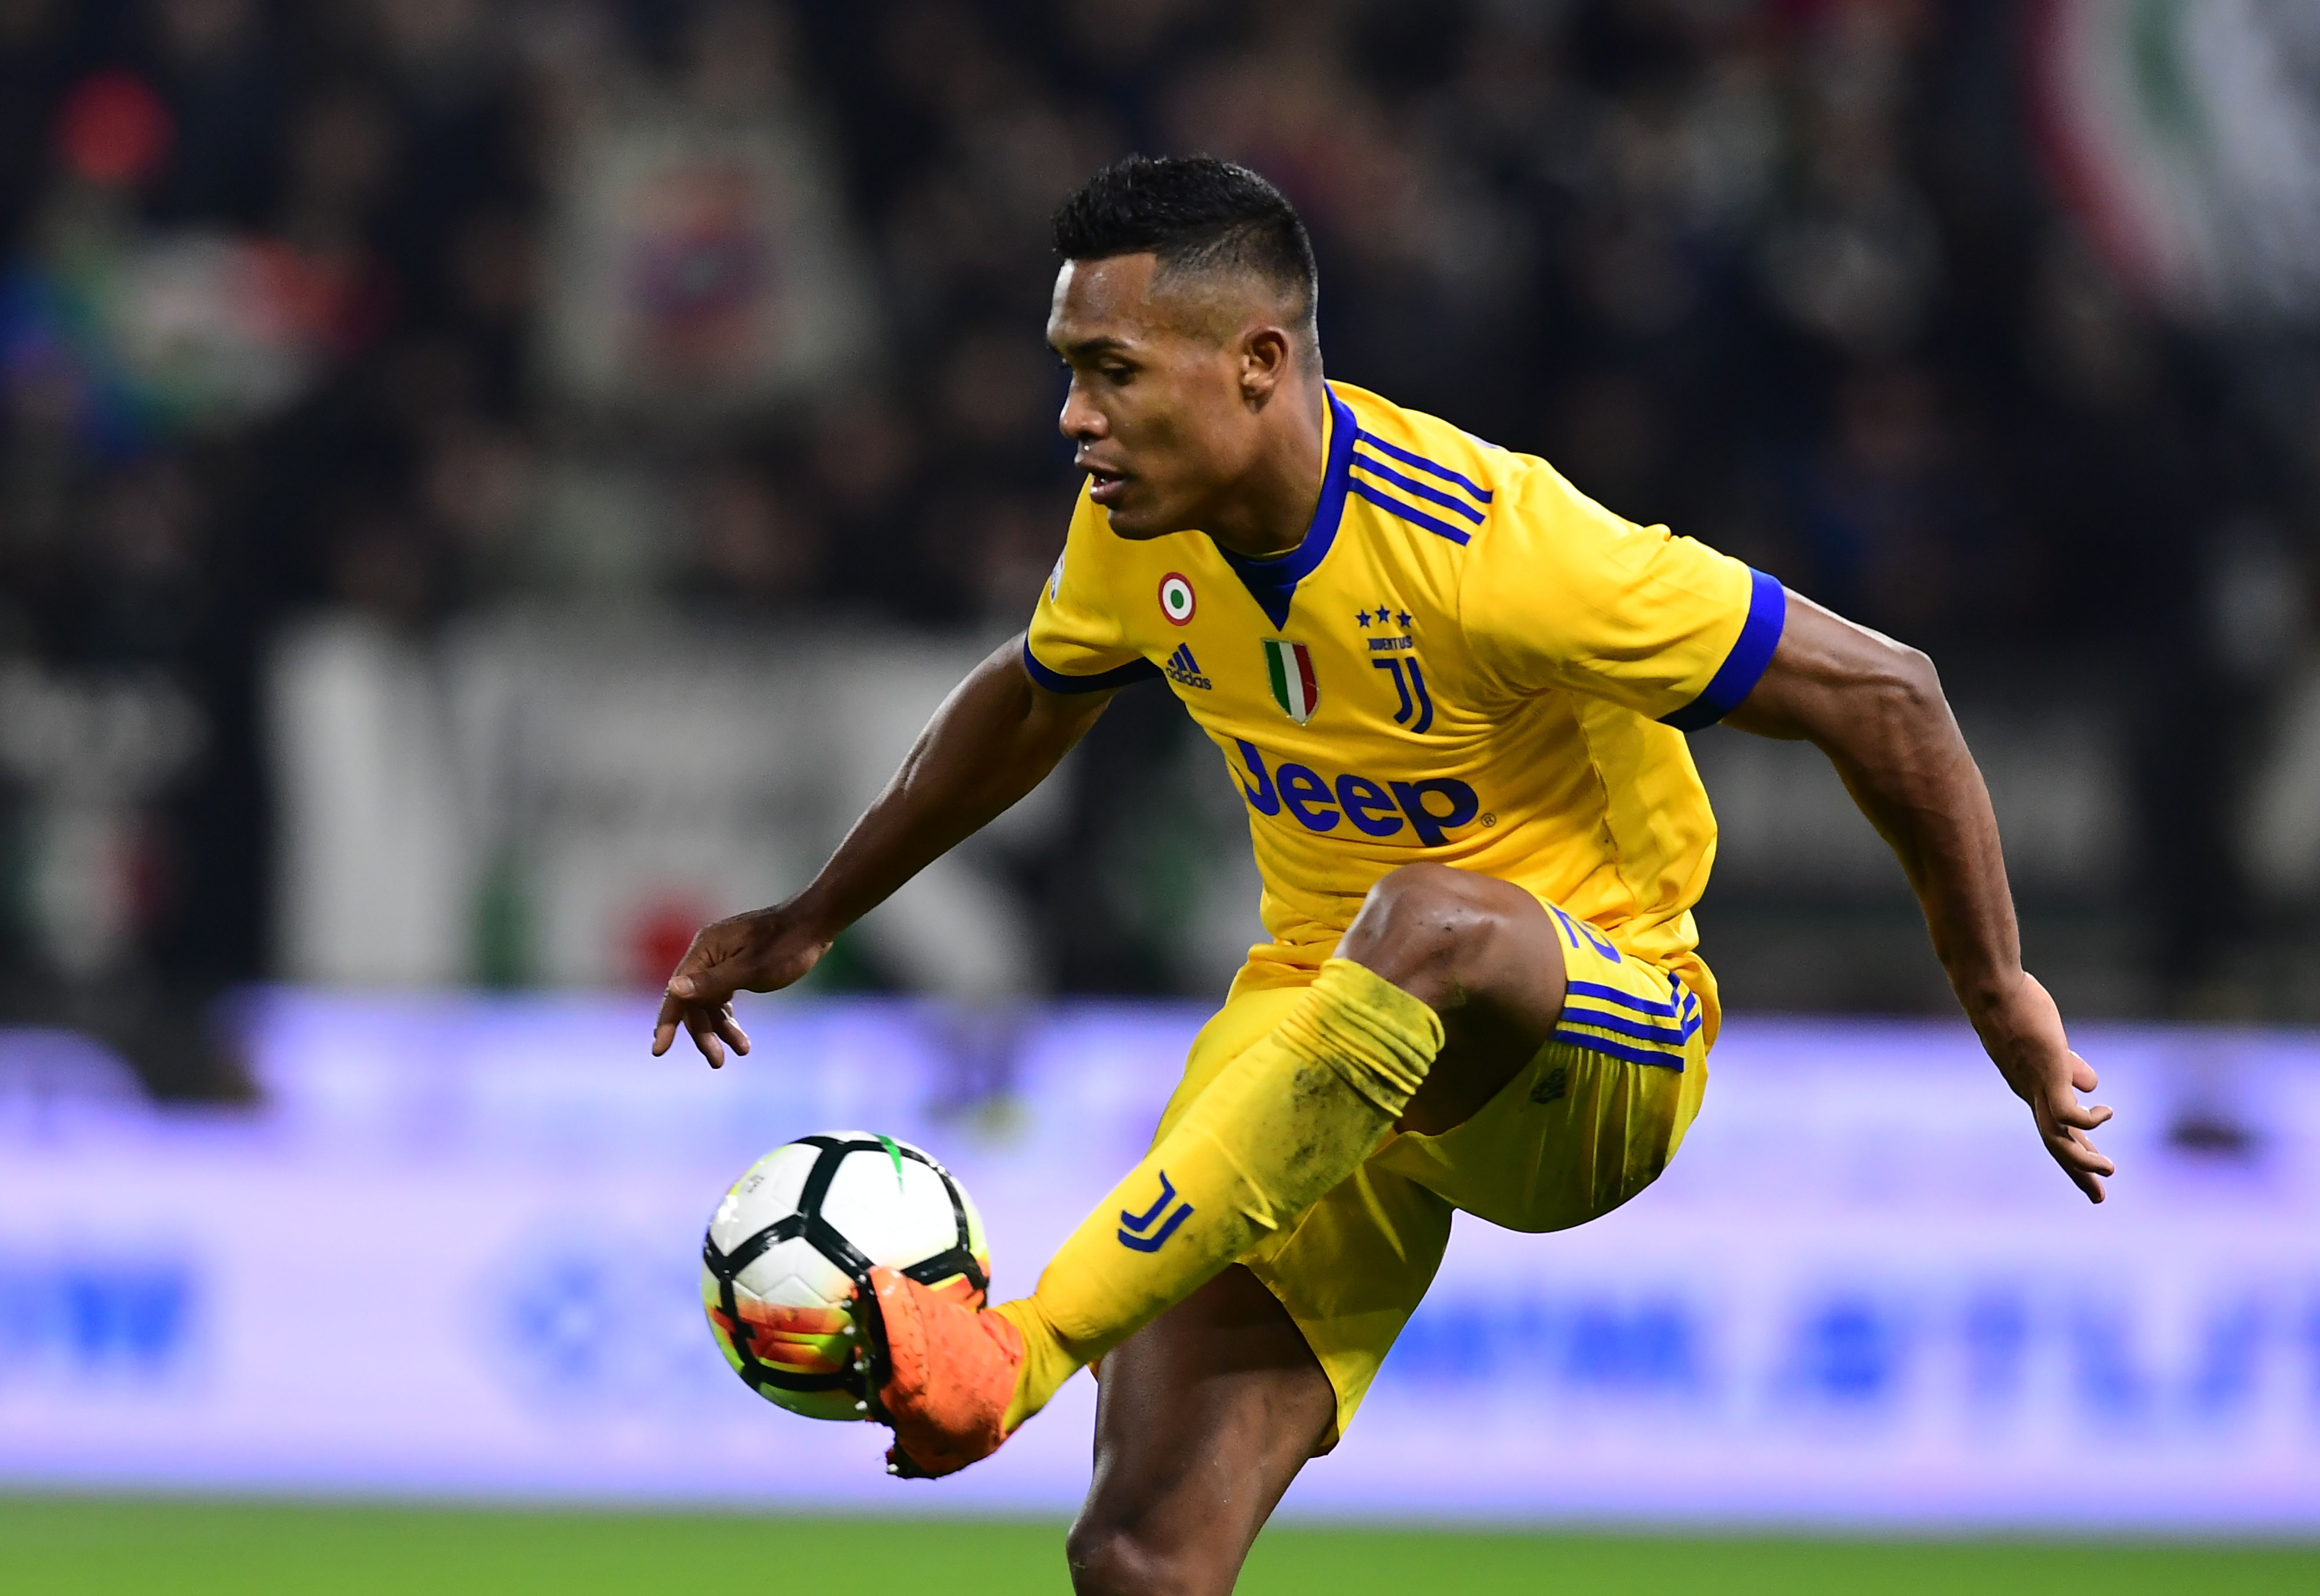 Juventus' Brazilian defender Alex Sandro Lobo Silva controls the ball during the Italian Serie A football match Spal vs Juventus at the Paolo-Mazza stadium in Ferrara on March 17, 2018. / AFP PHOTO / MIGUEL MEDINA        (Photo credit should read MIGUEL MEDINA/AFP/Getty Images)